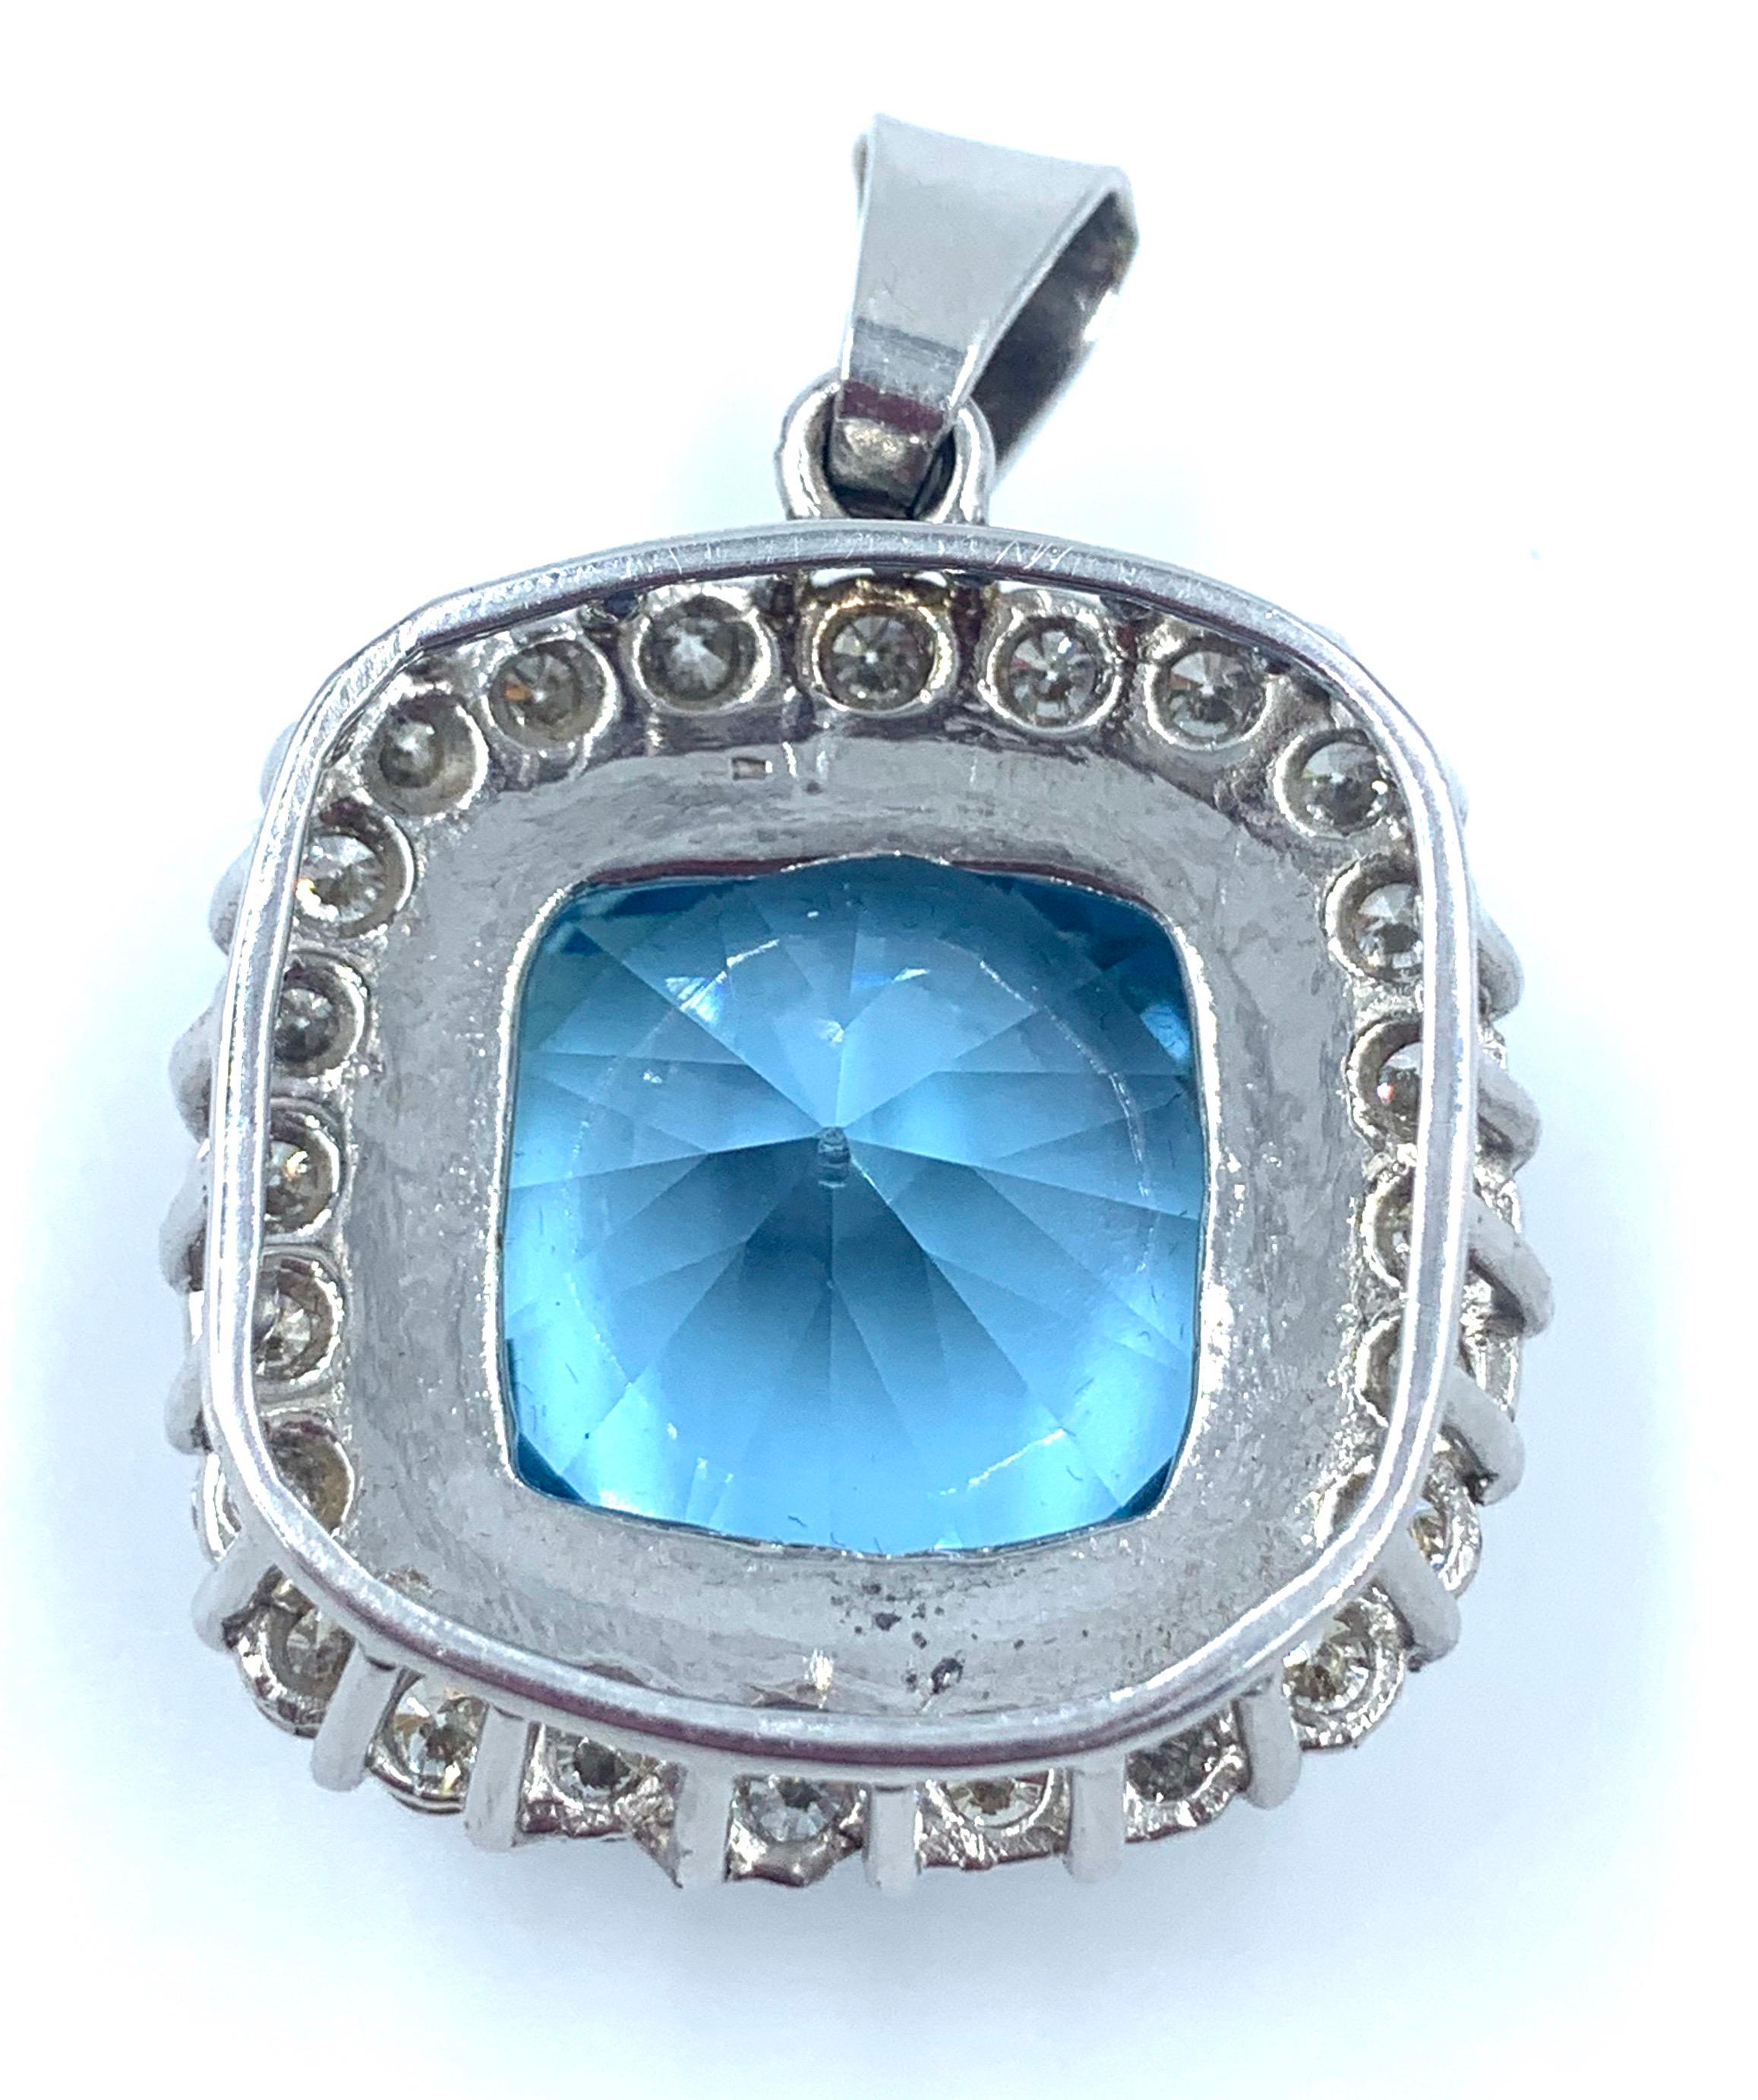 This is gorgeous aquamarine and diamond pendent set in 18K white gold. In the center, an exceptional 53ct aquamarine, originating from the Santa Maria aqua mine in Brazil, known for the finest aquamarines in the world. Framing this rare, very deep